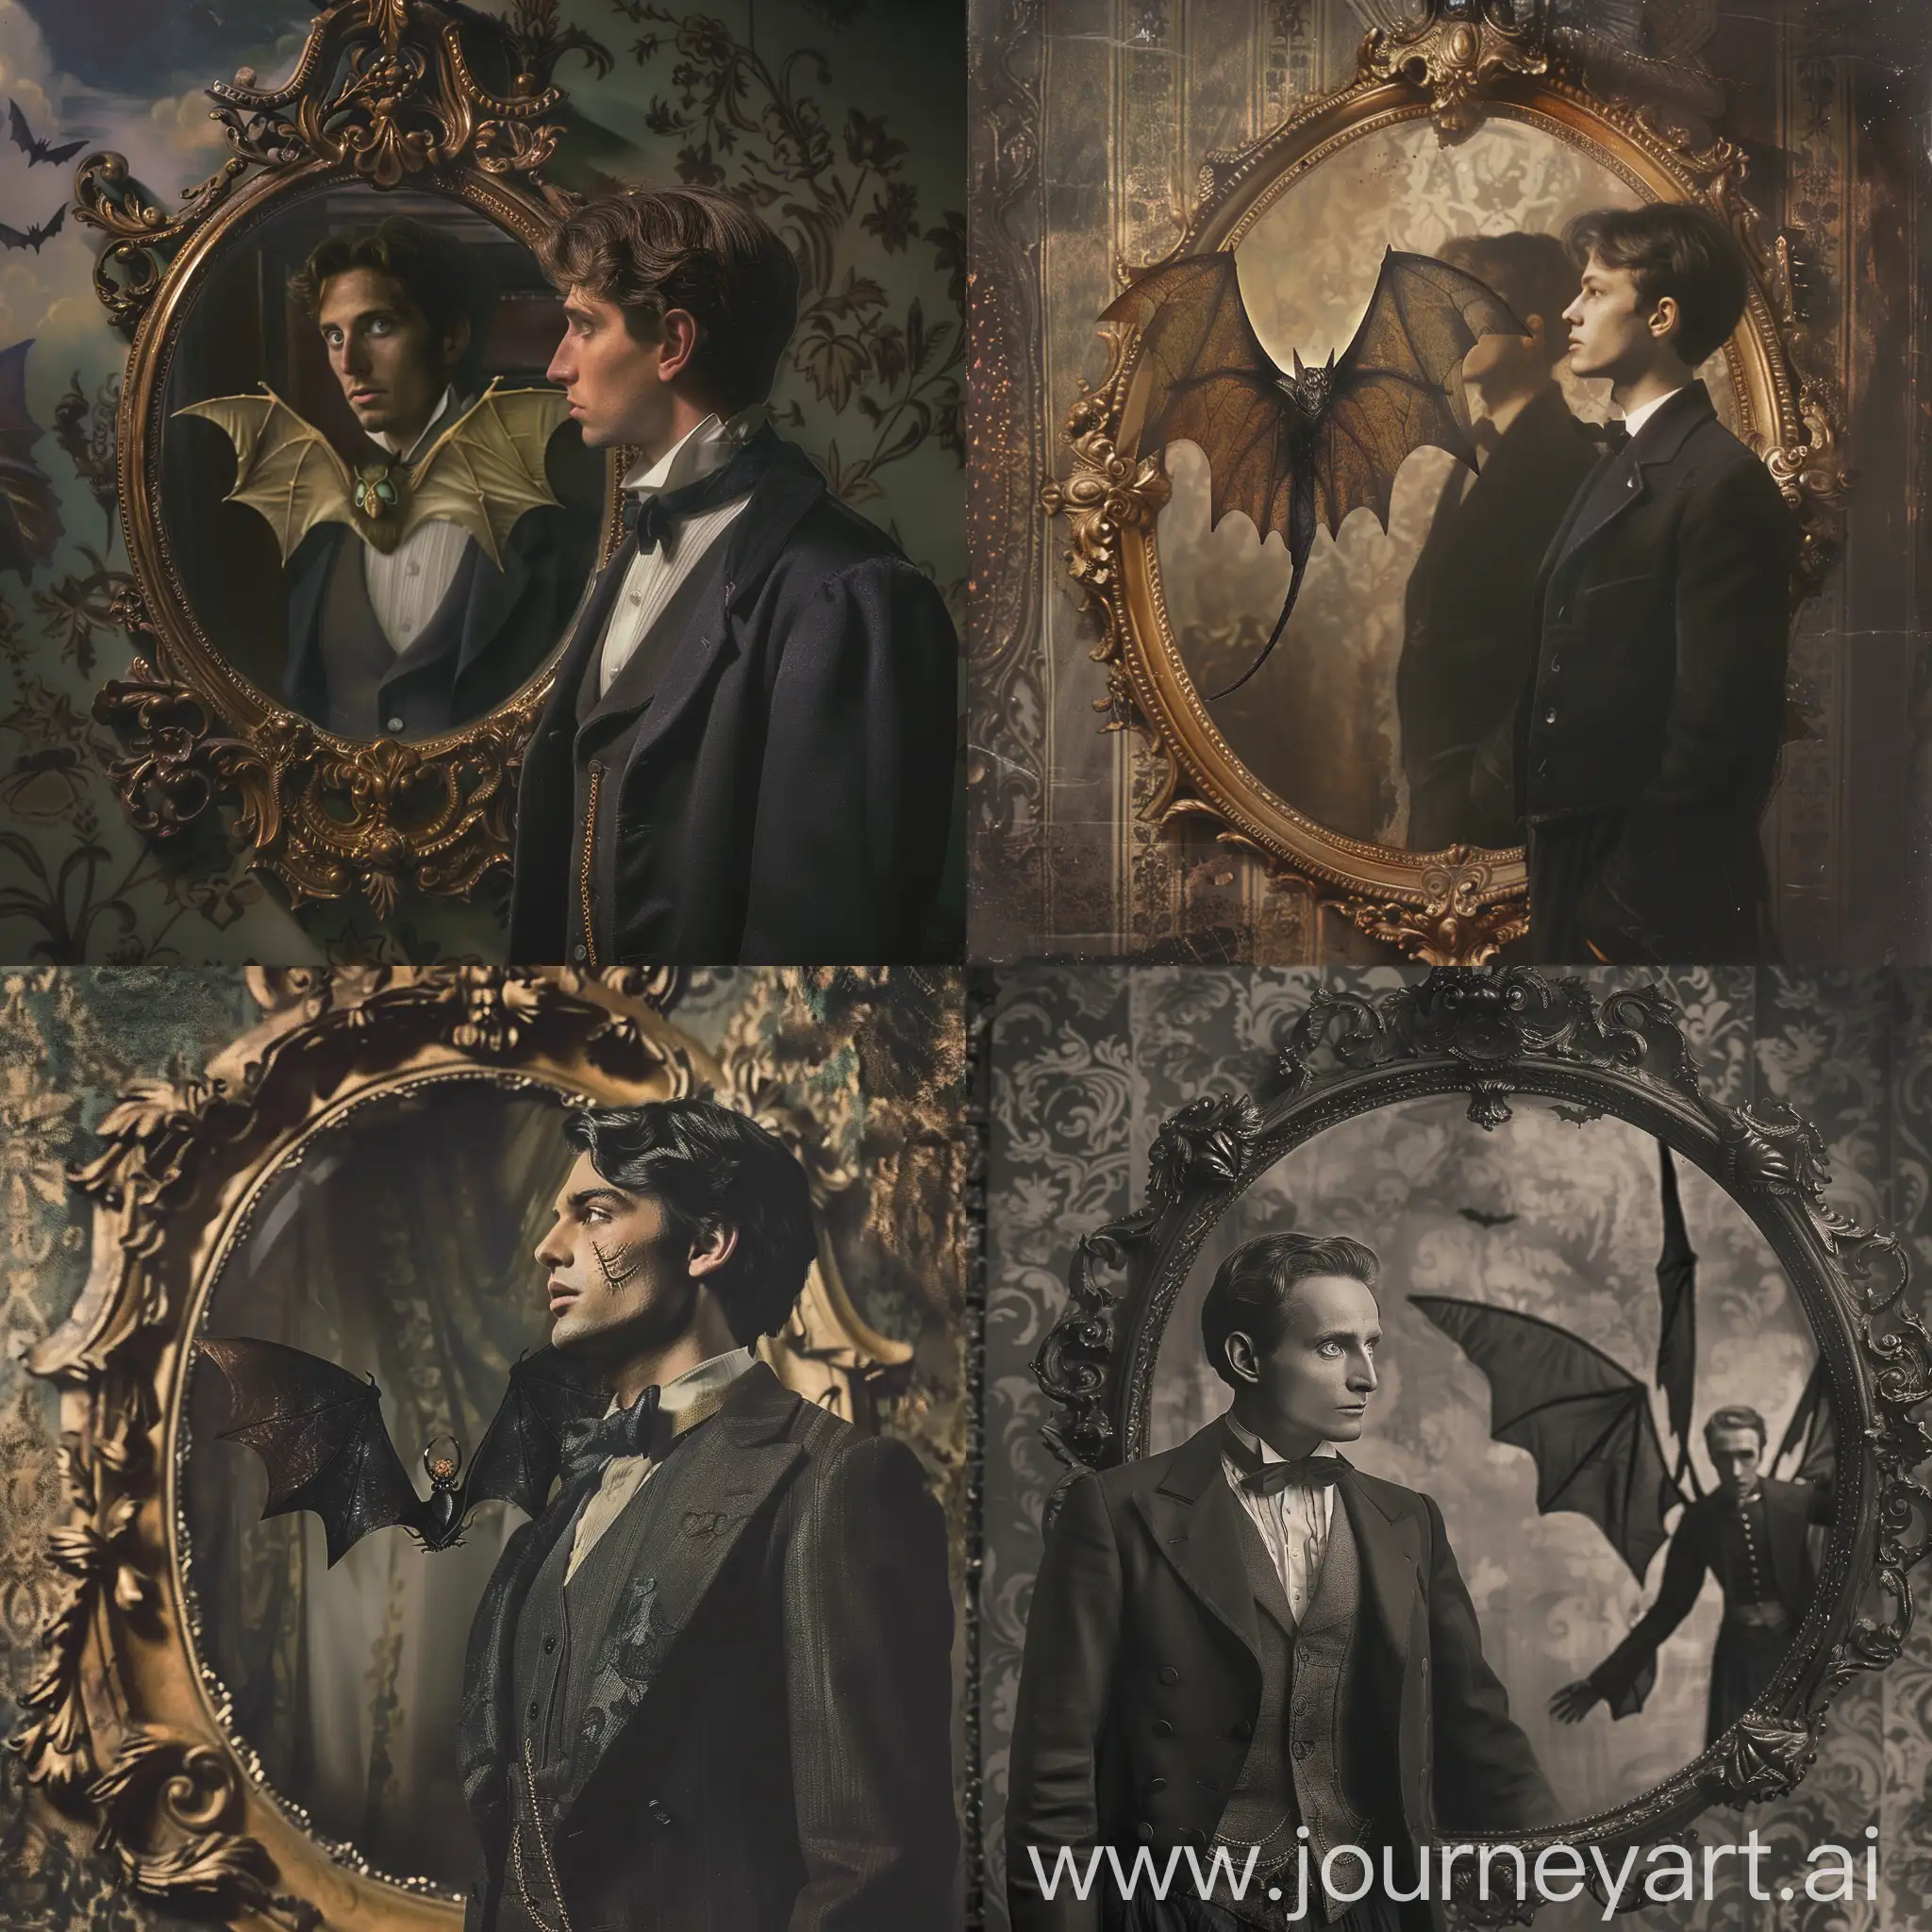 Edwardian-Man-Fascinated-by-Reflection-in-Ornate-Winged-Vampire-Mirror